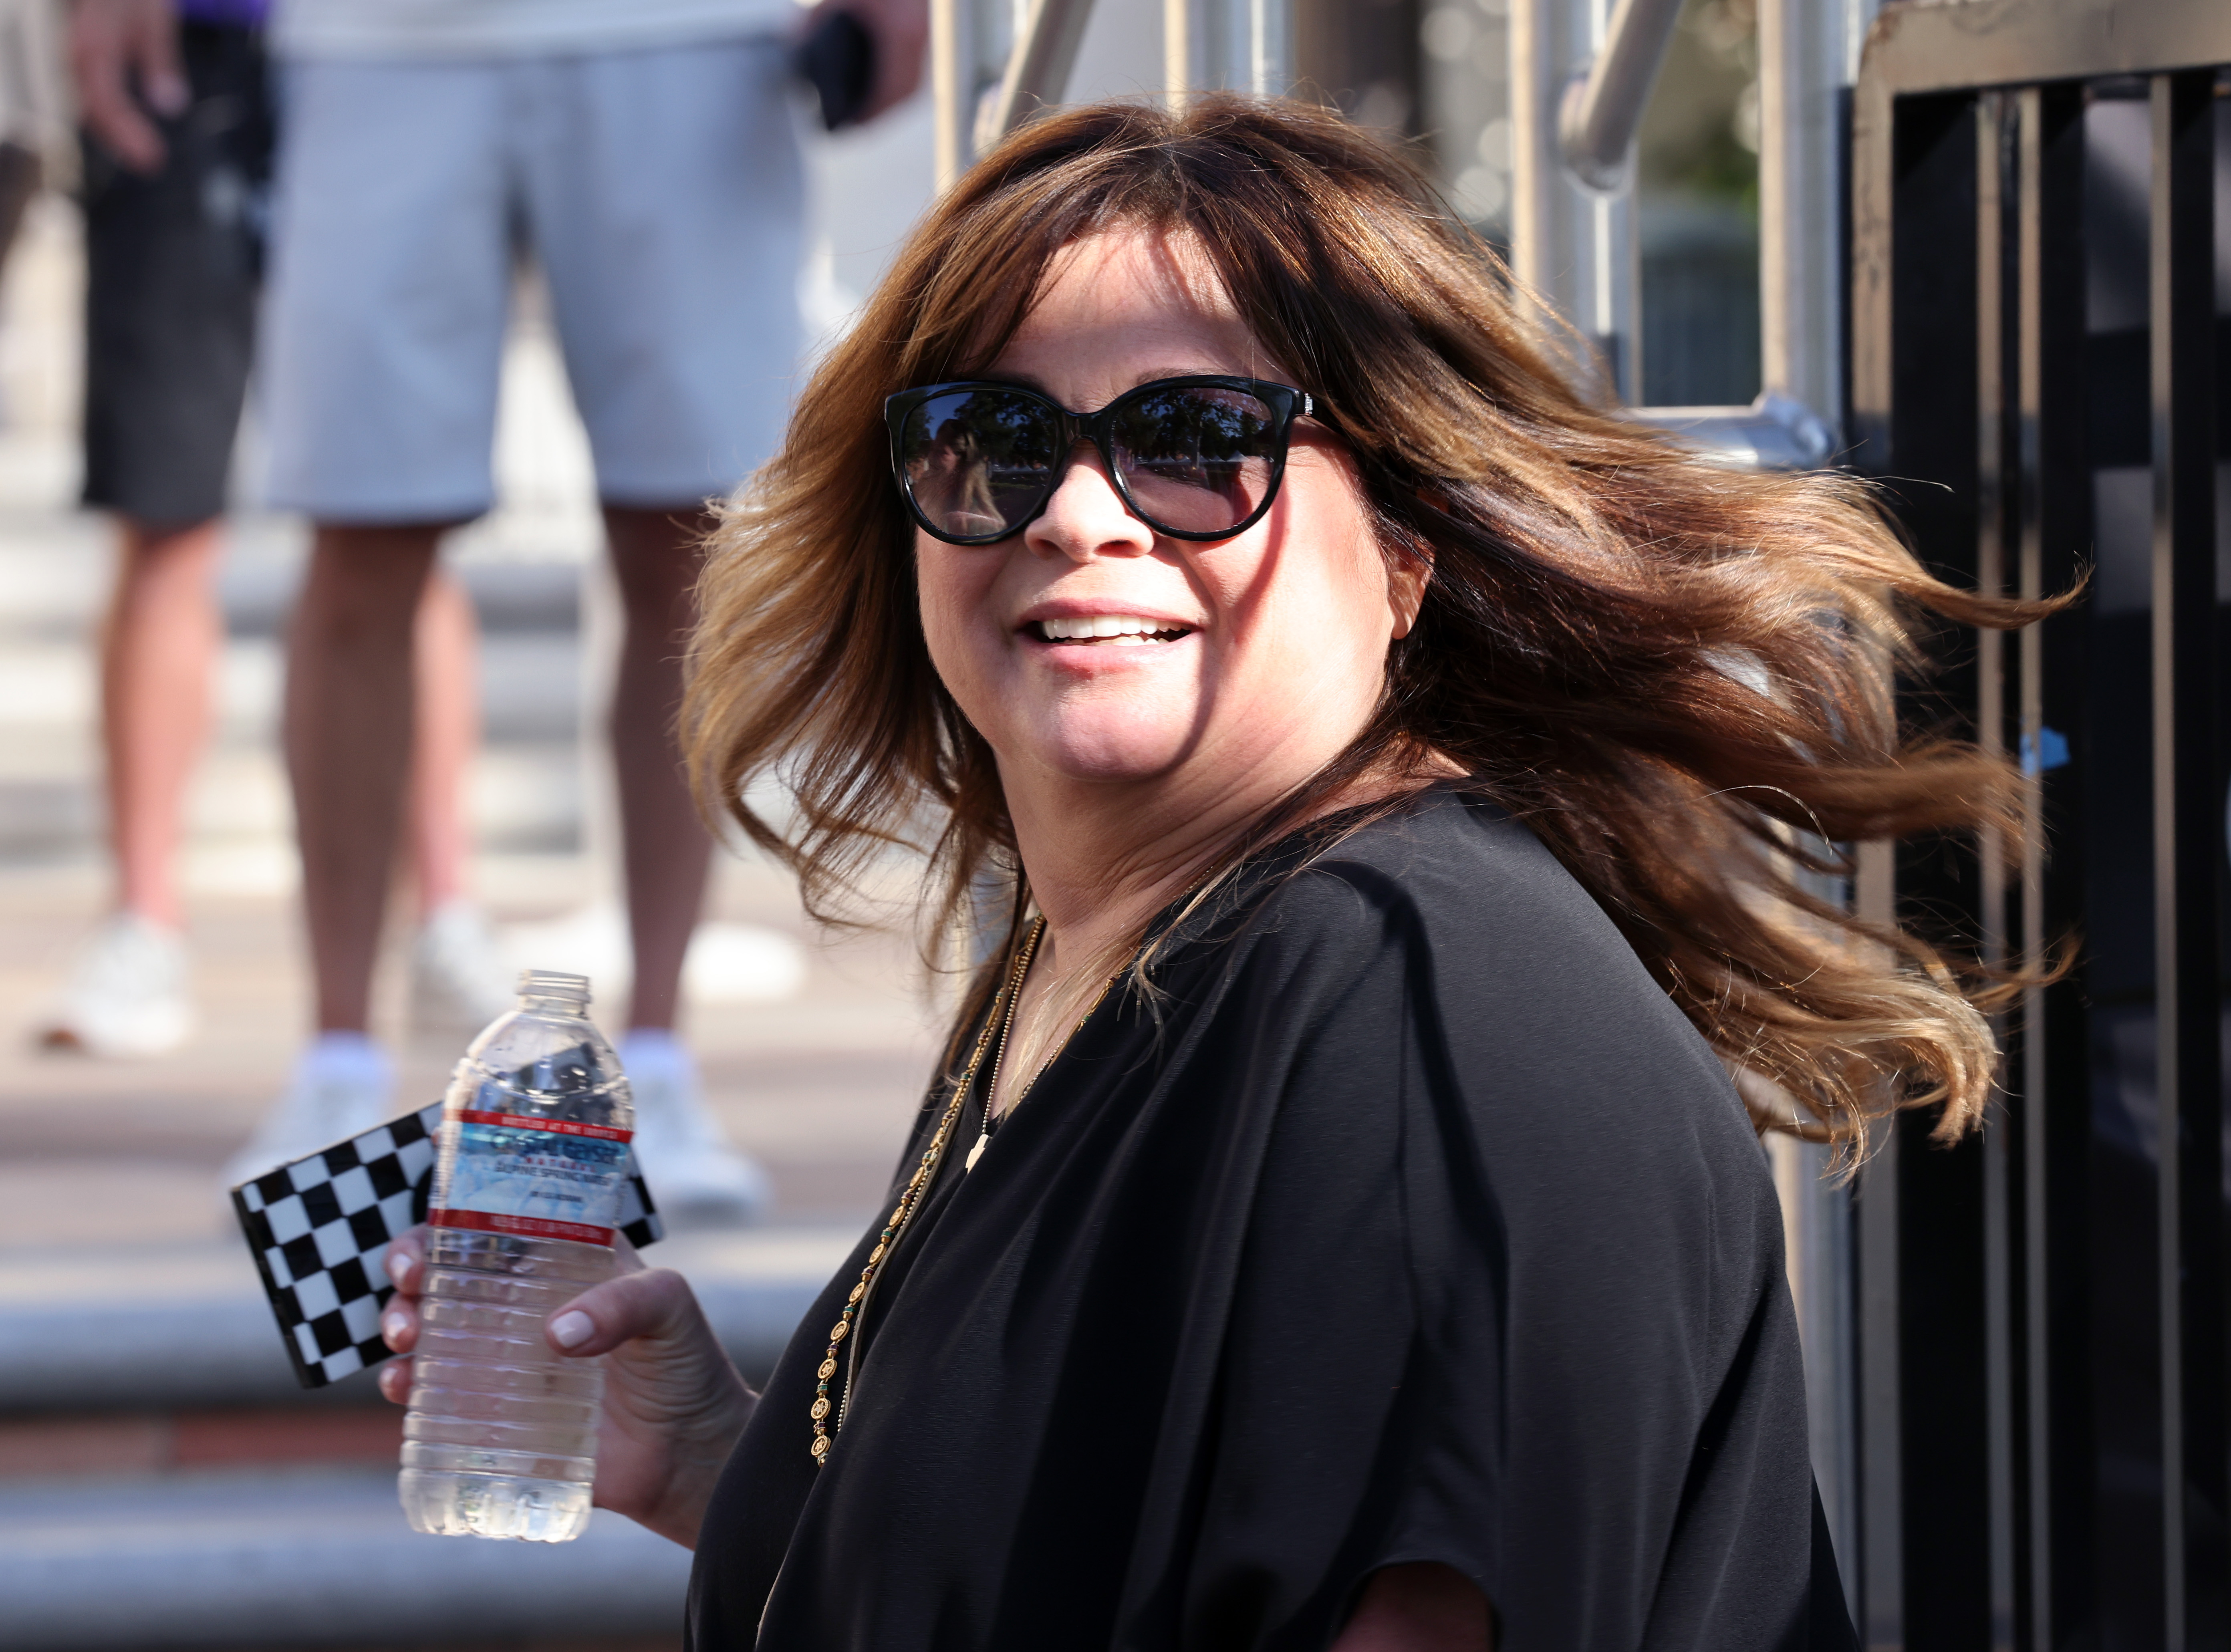 Valerie Bertinelli at the Los Angeles Times Festival of Books in April 2022 | Source: Getty Images